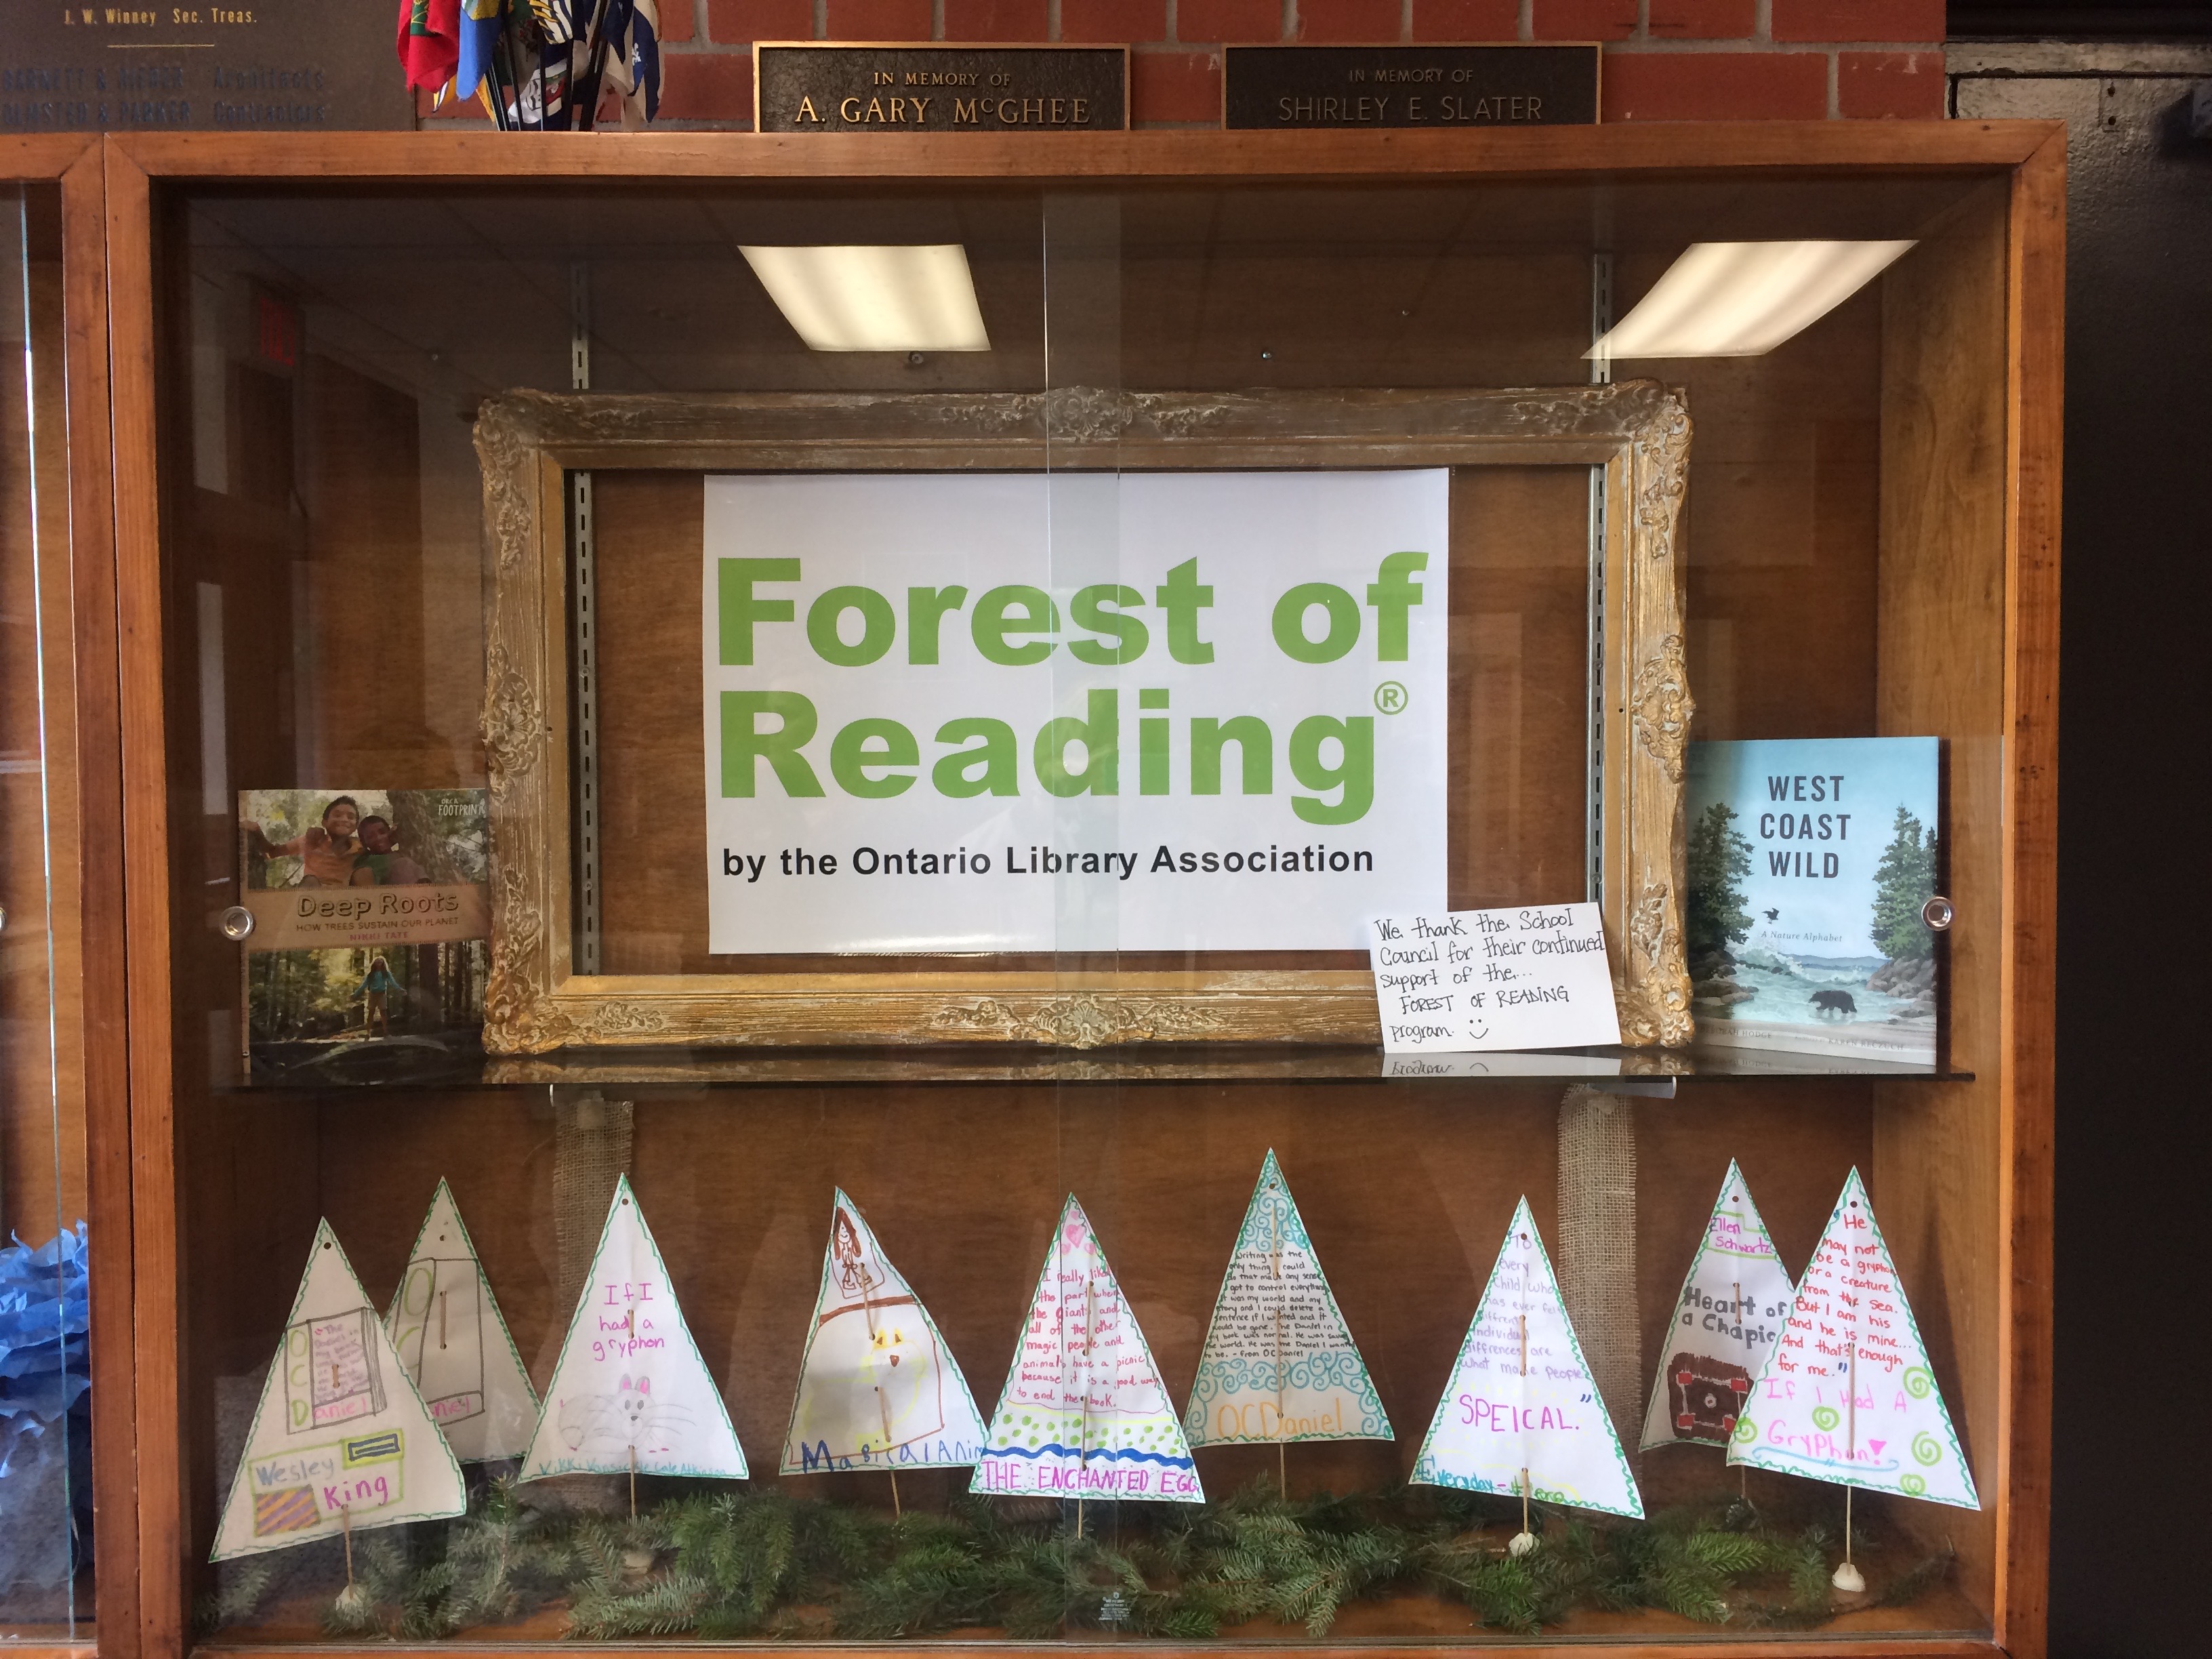 display case with Forest of Reading banner and trees